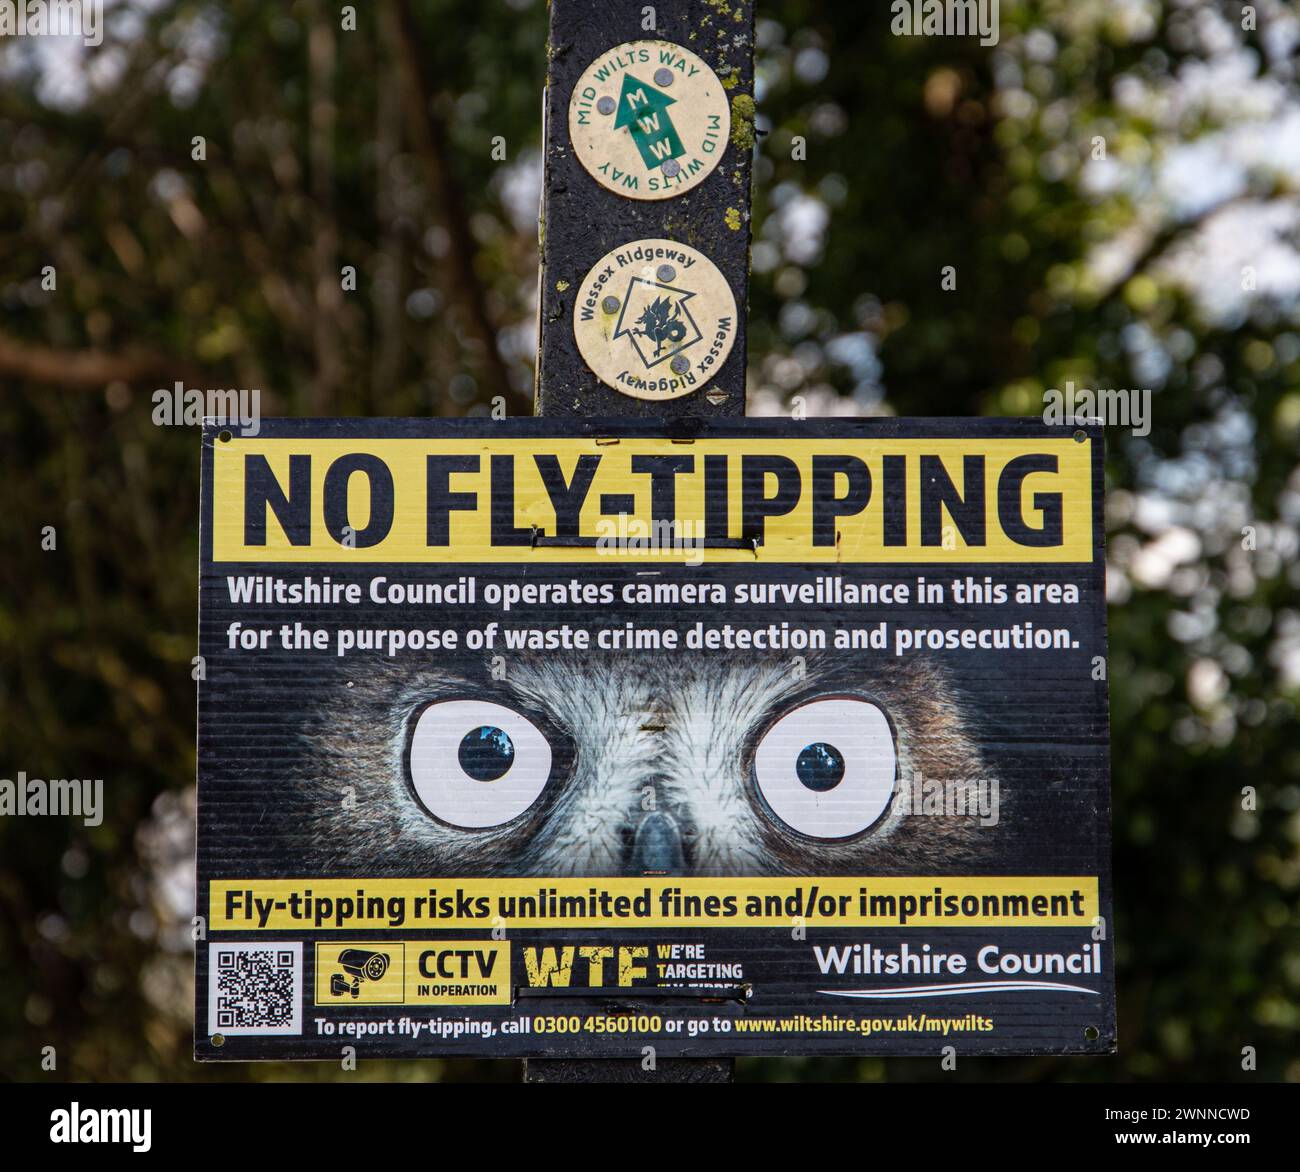 No fly-tipping sign with warning of camera surveillance and potential fines in Wiltshire area. Stock Photo